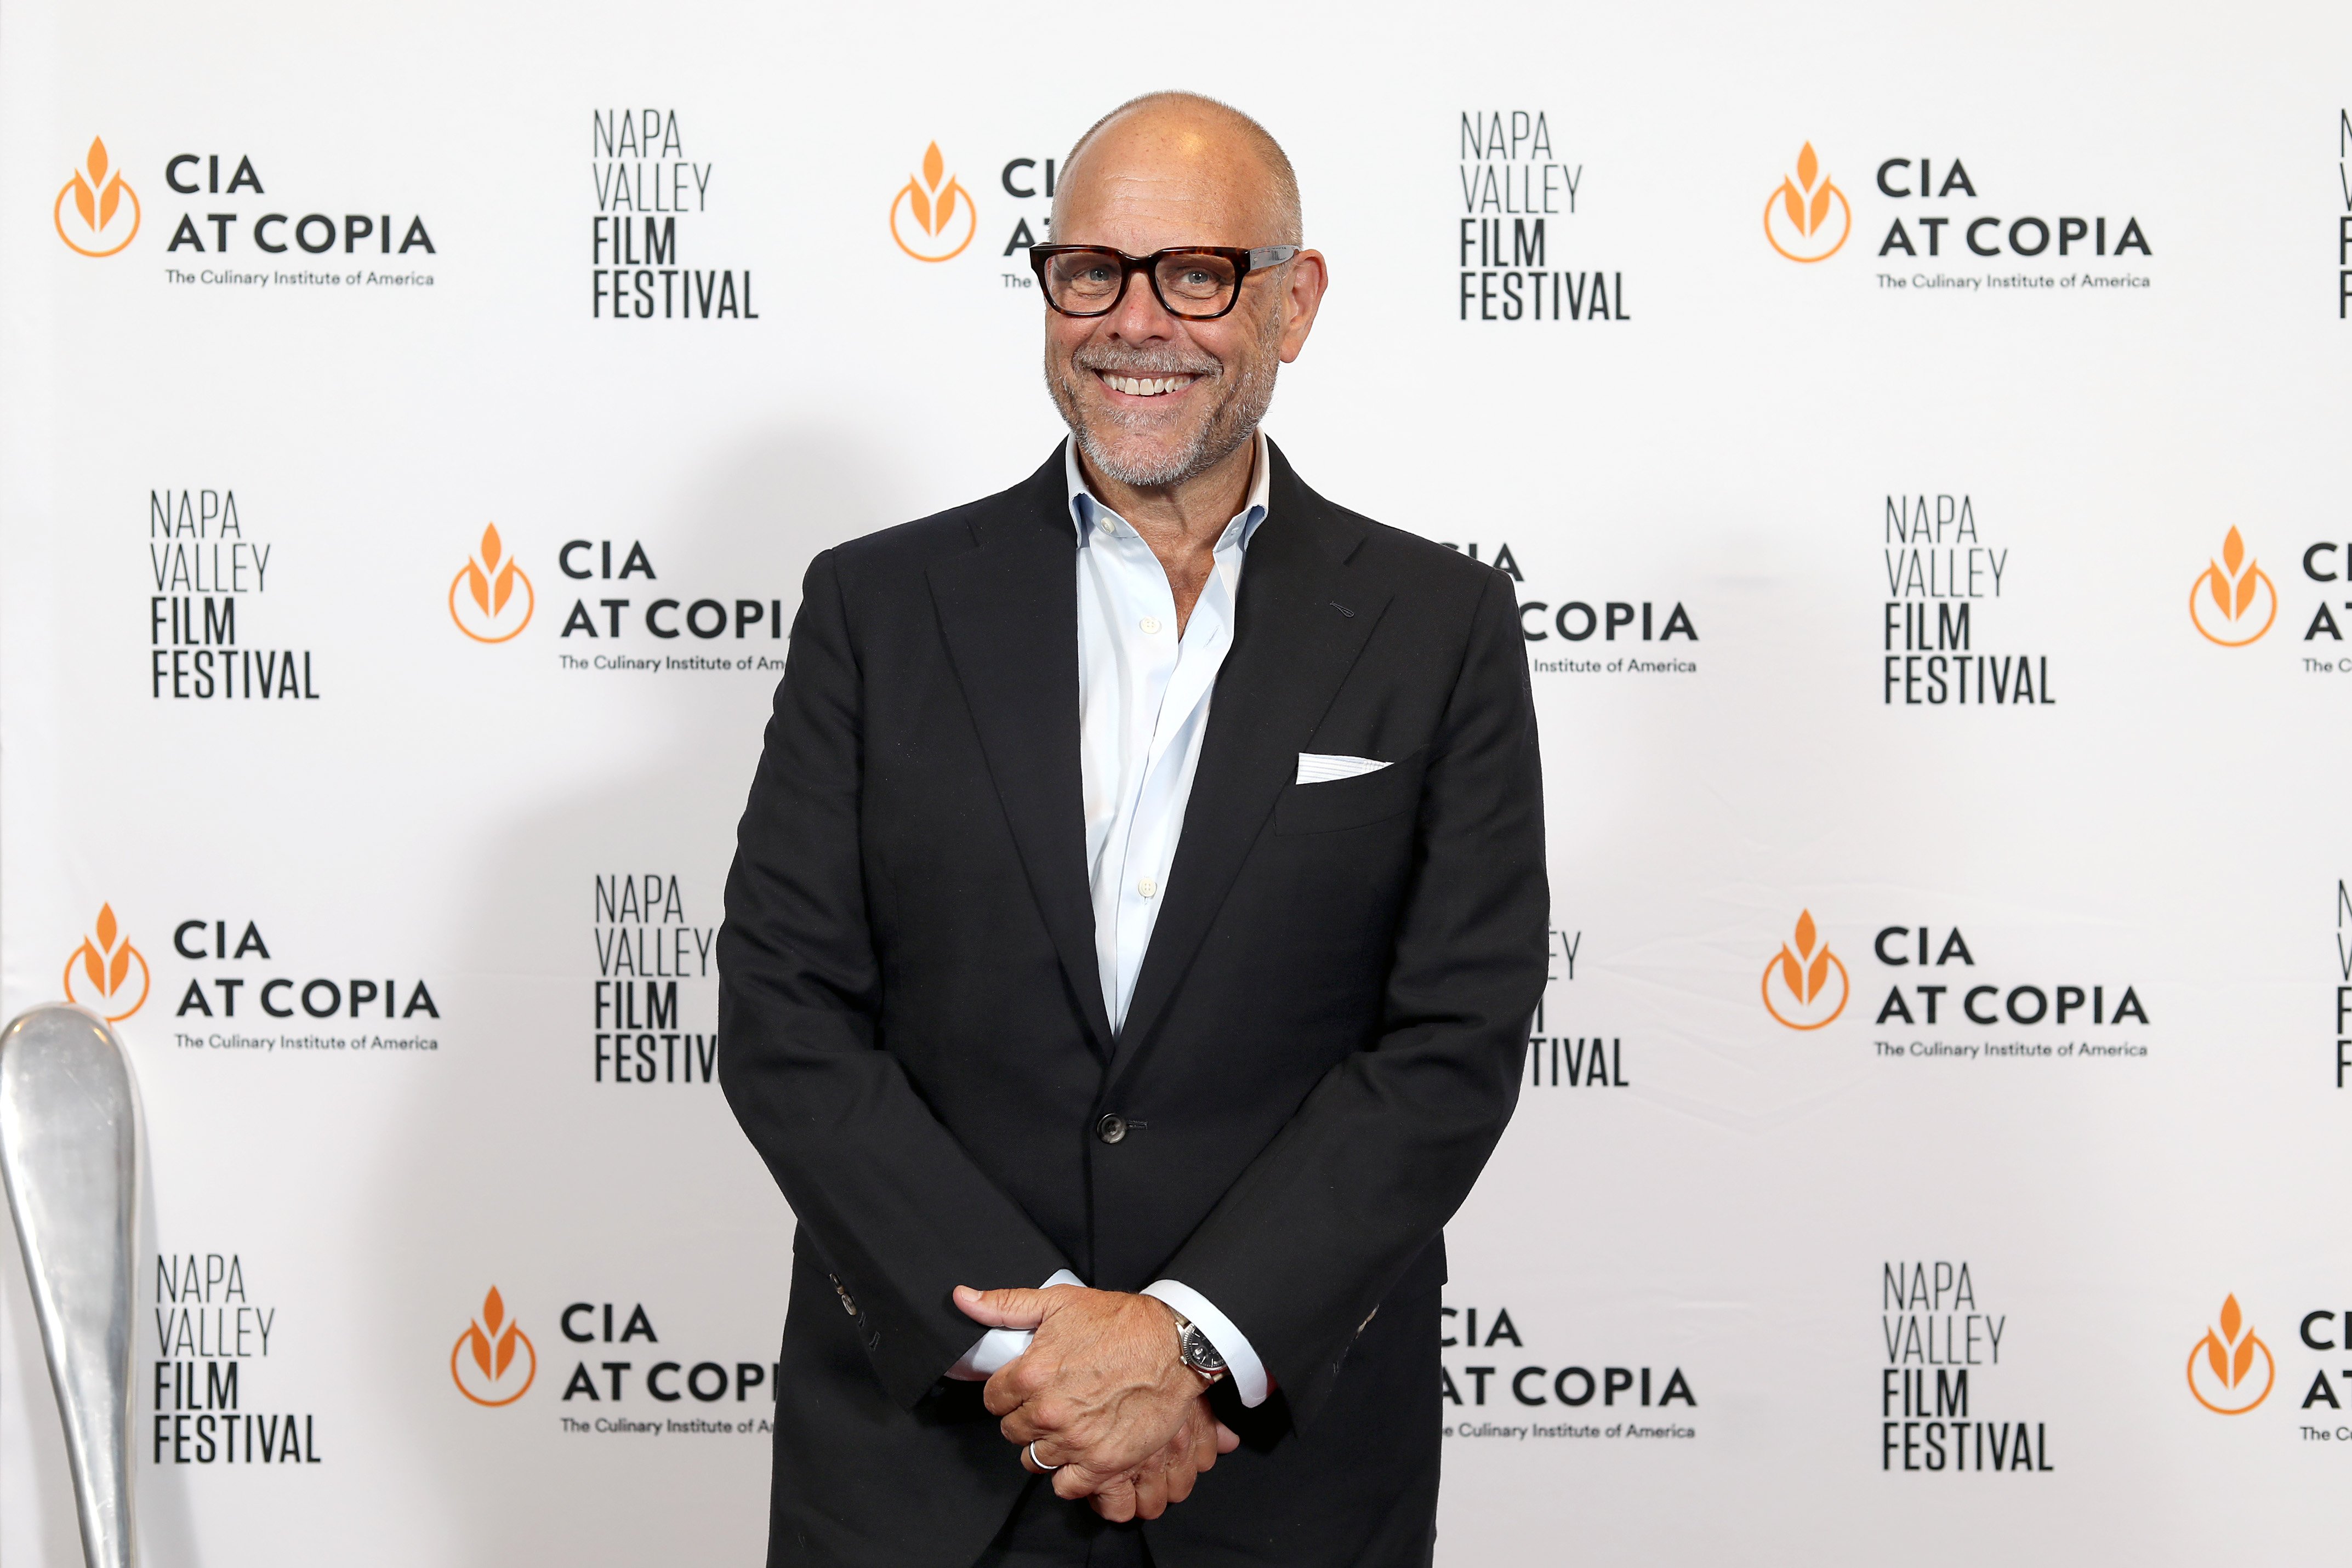 Celebrity chef Alton Brown poses for a photograph in a dark suit and white shirt.